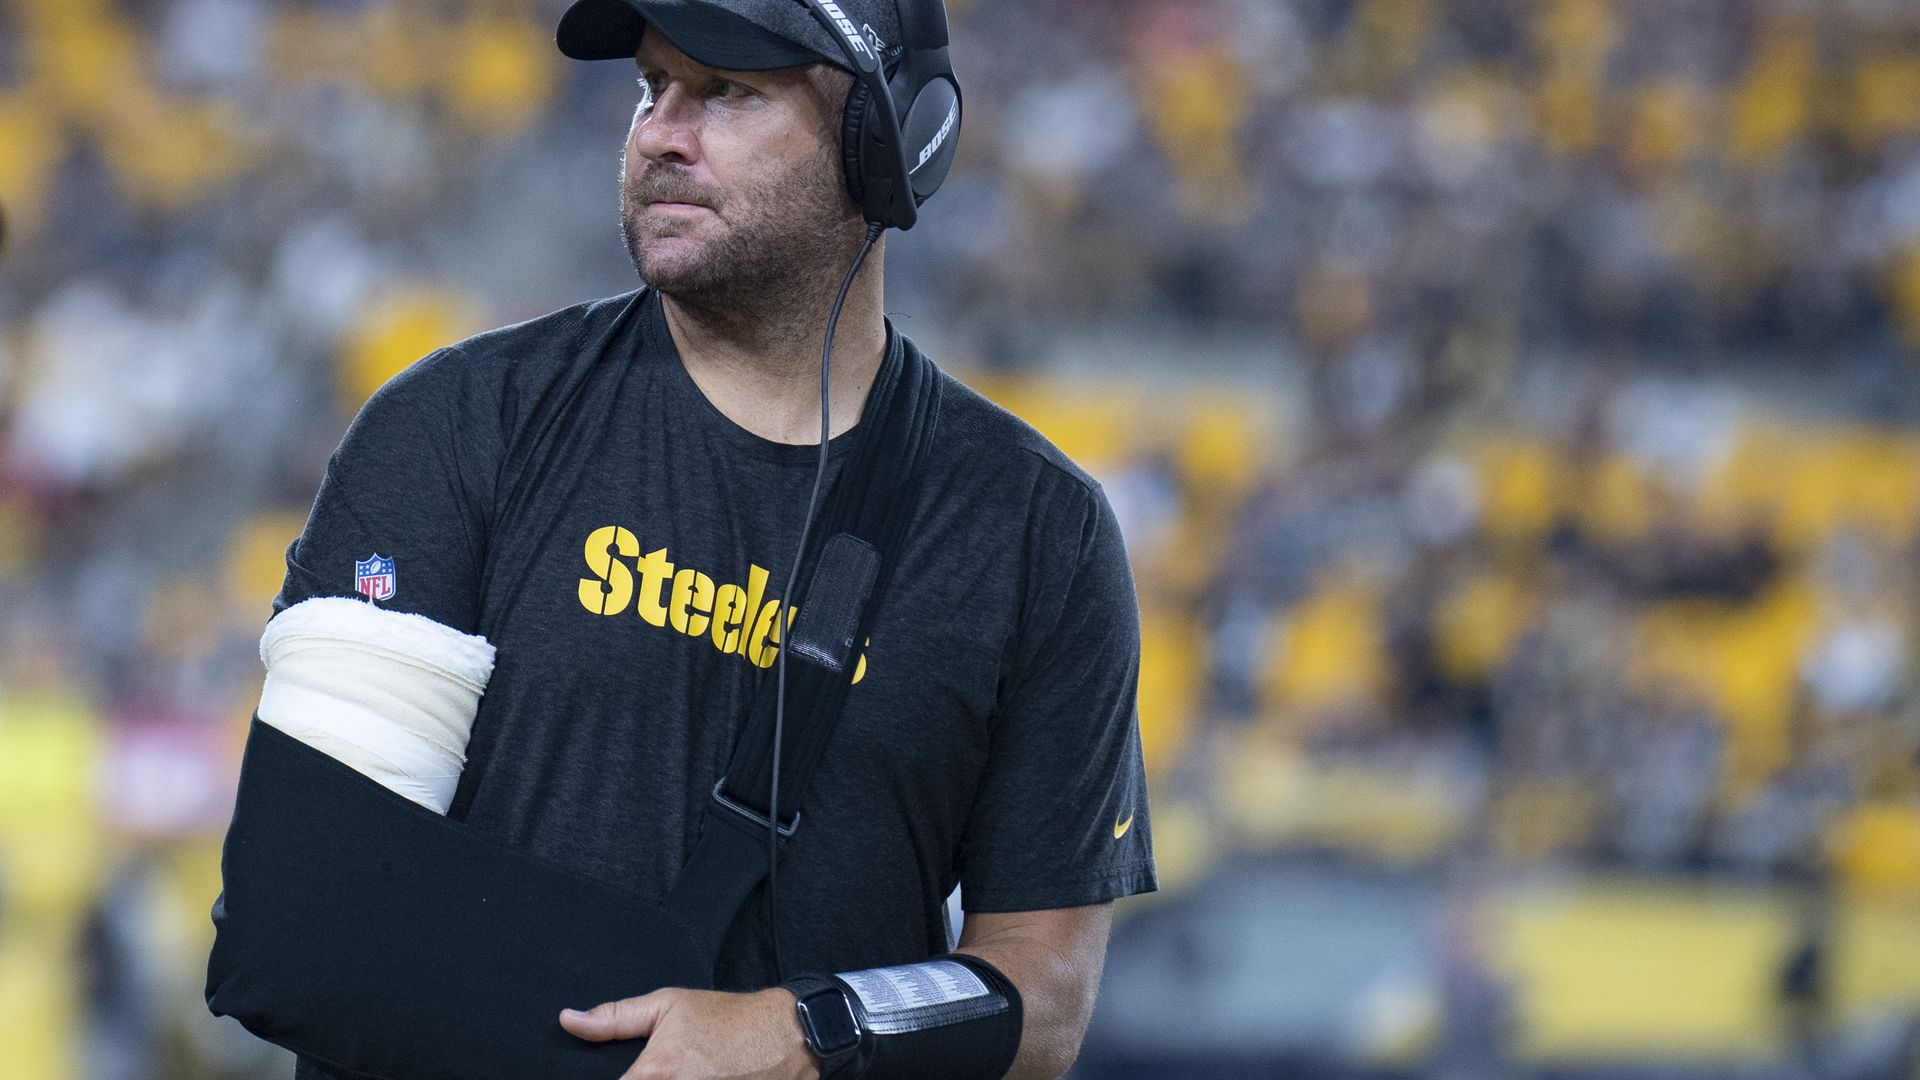 Ben Roethlisberger wearing an Apple Watch on the sidelines of the Steelers-Bengals game.